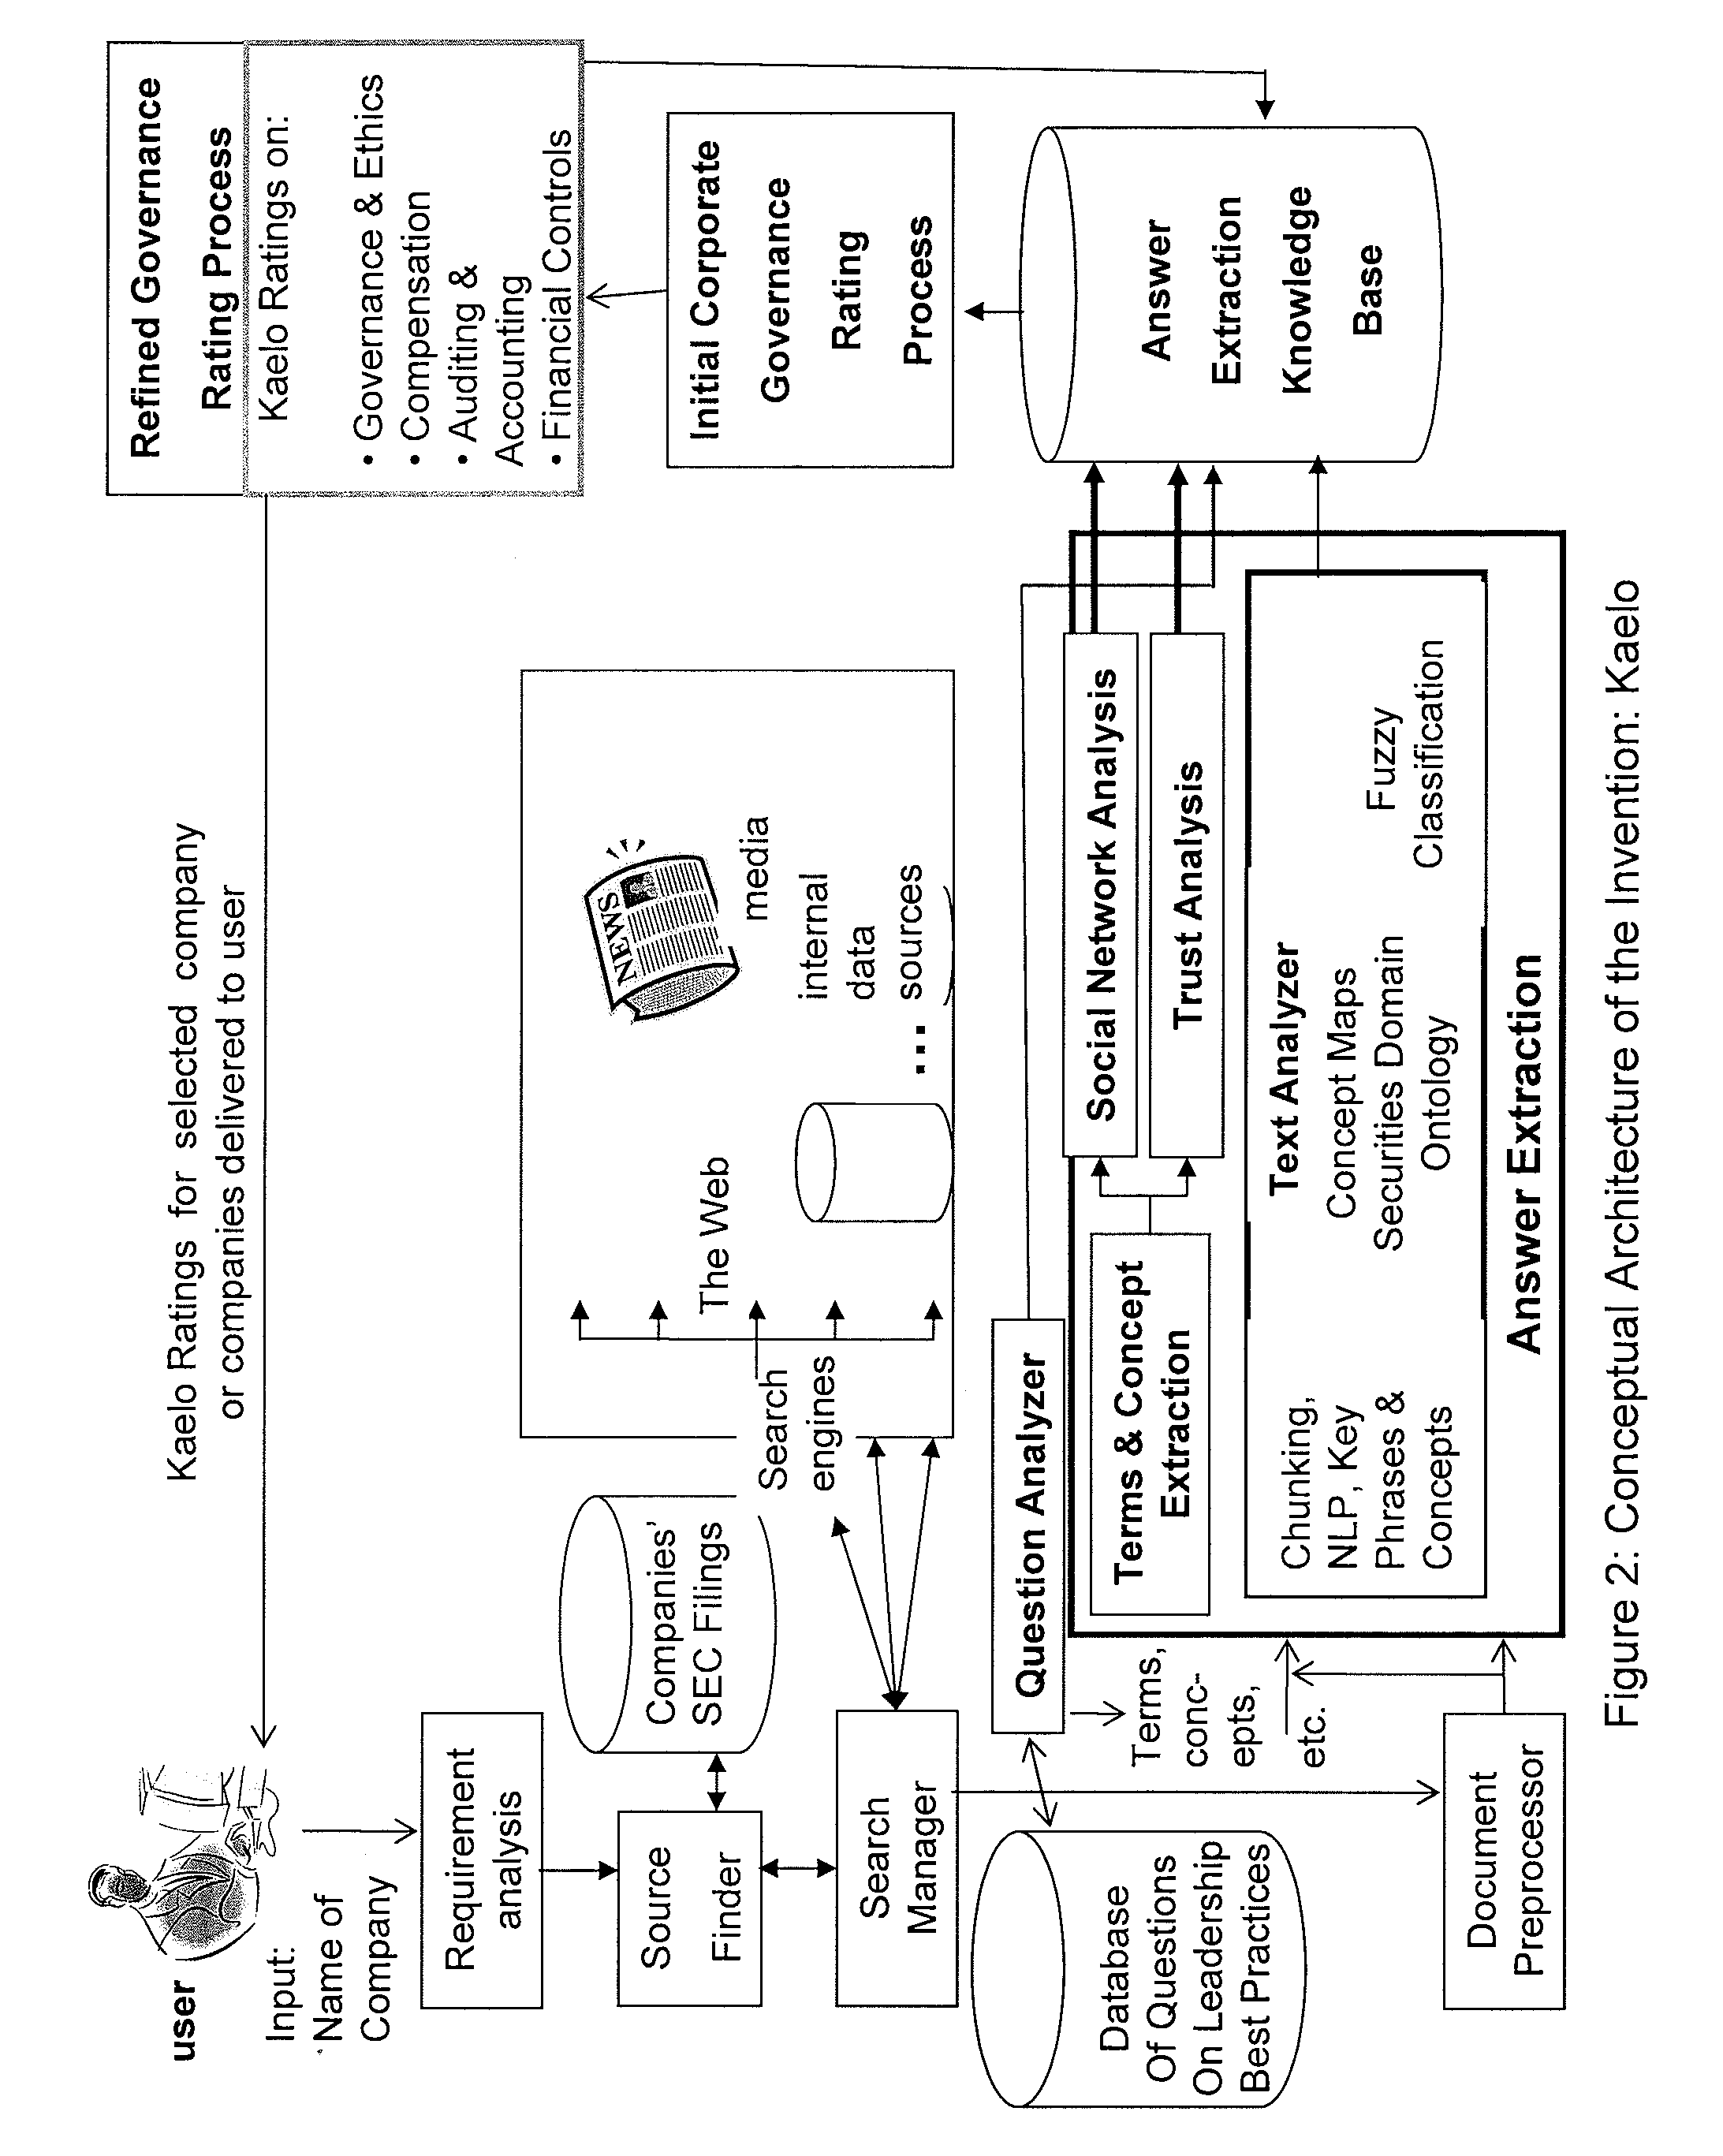 Method and system for an automated corporate governance rating system